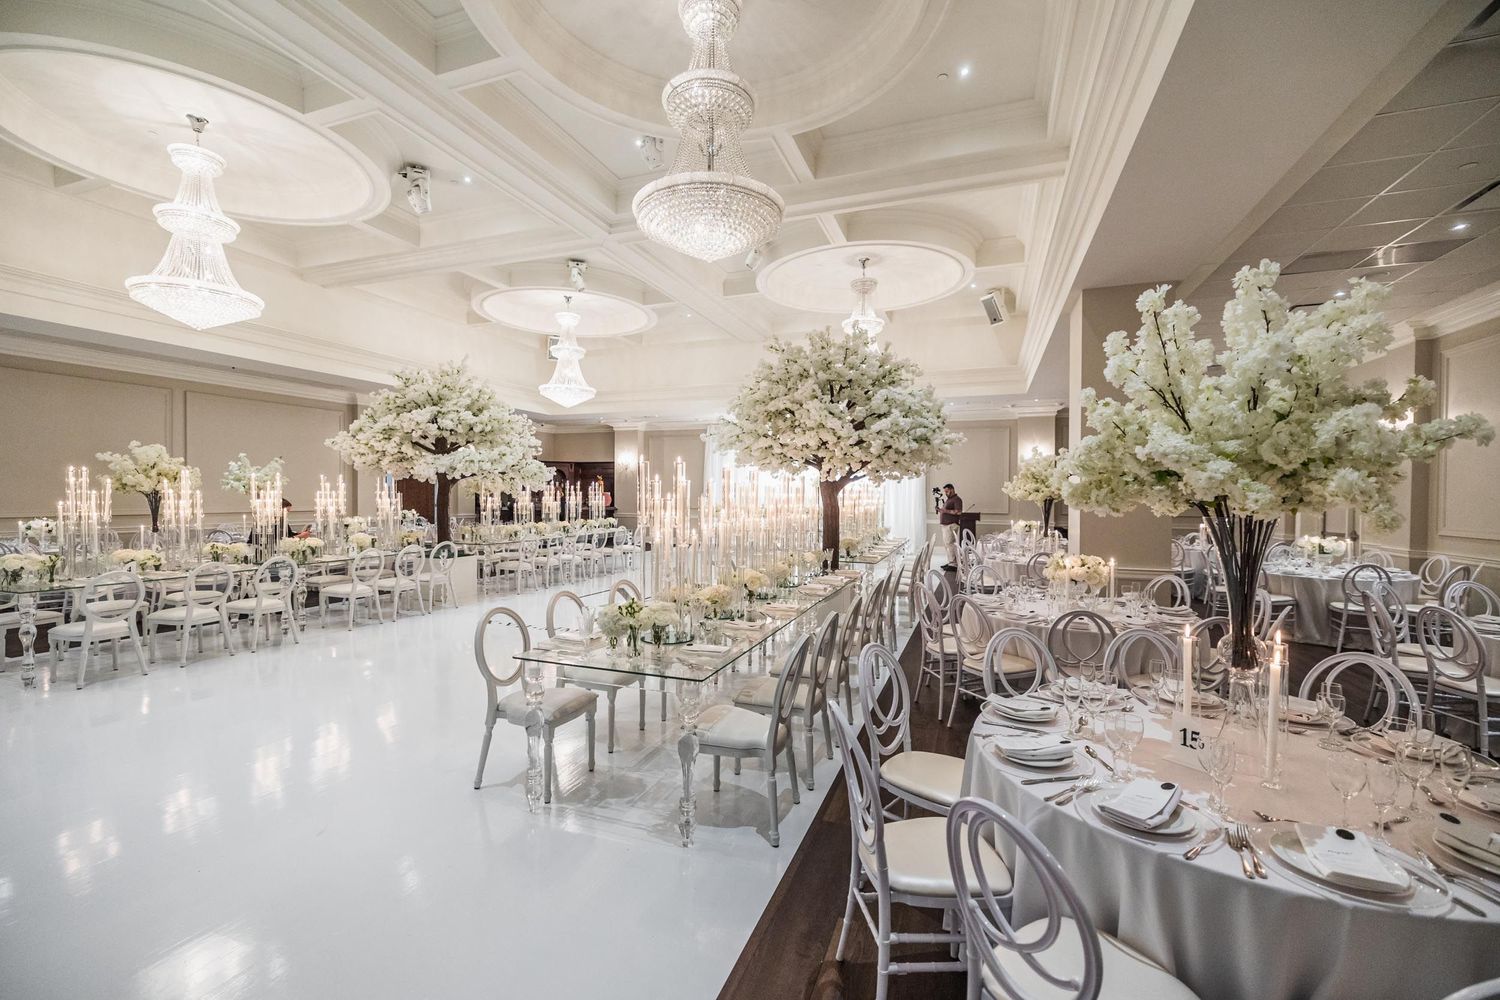 Luxurious spaces for unforgettable events